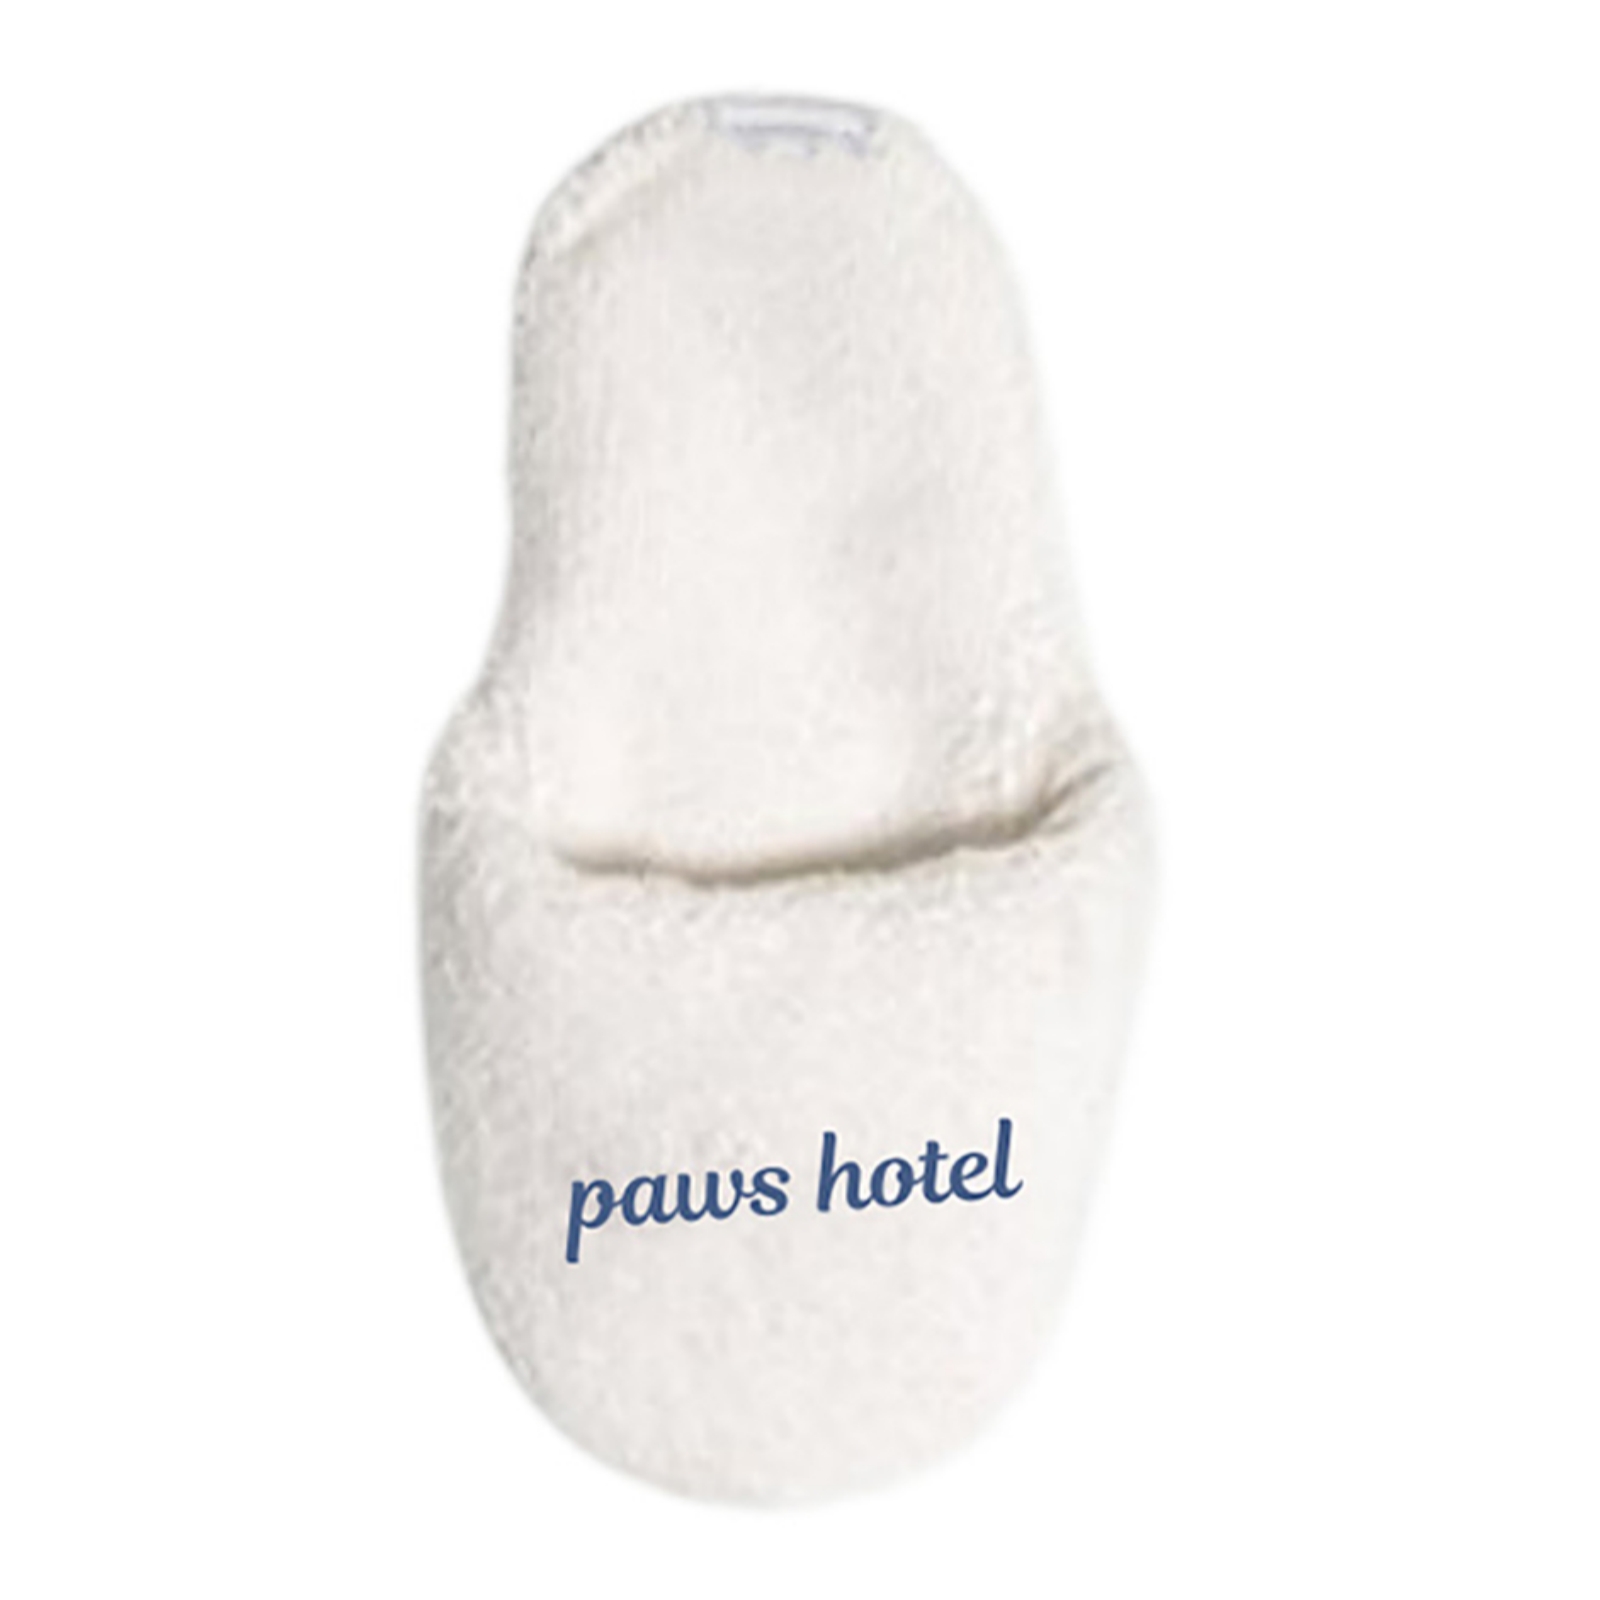 Hotel Style Pet Bath Towel Bathrobe With Eye Mask Slippers Soft Comfortable Pet Clothes Photo Props Holiday Gifts For Dogs hotel style bath towel S (chest circumference 41cm)